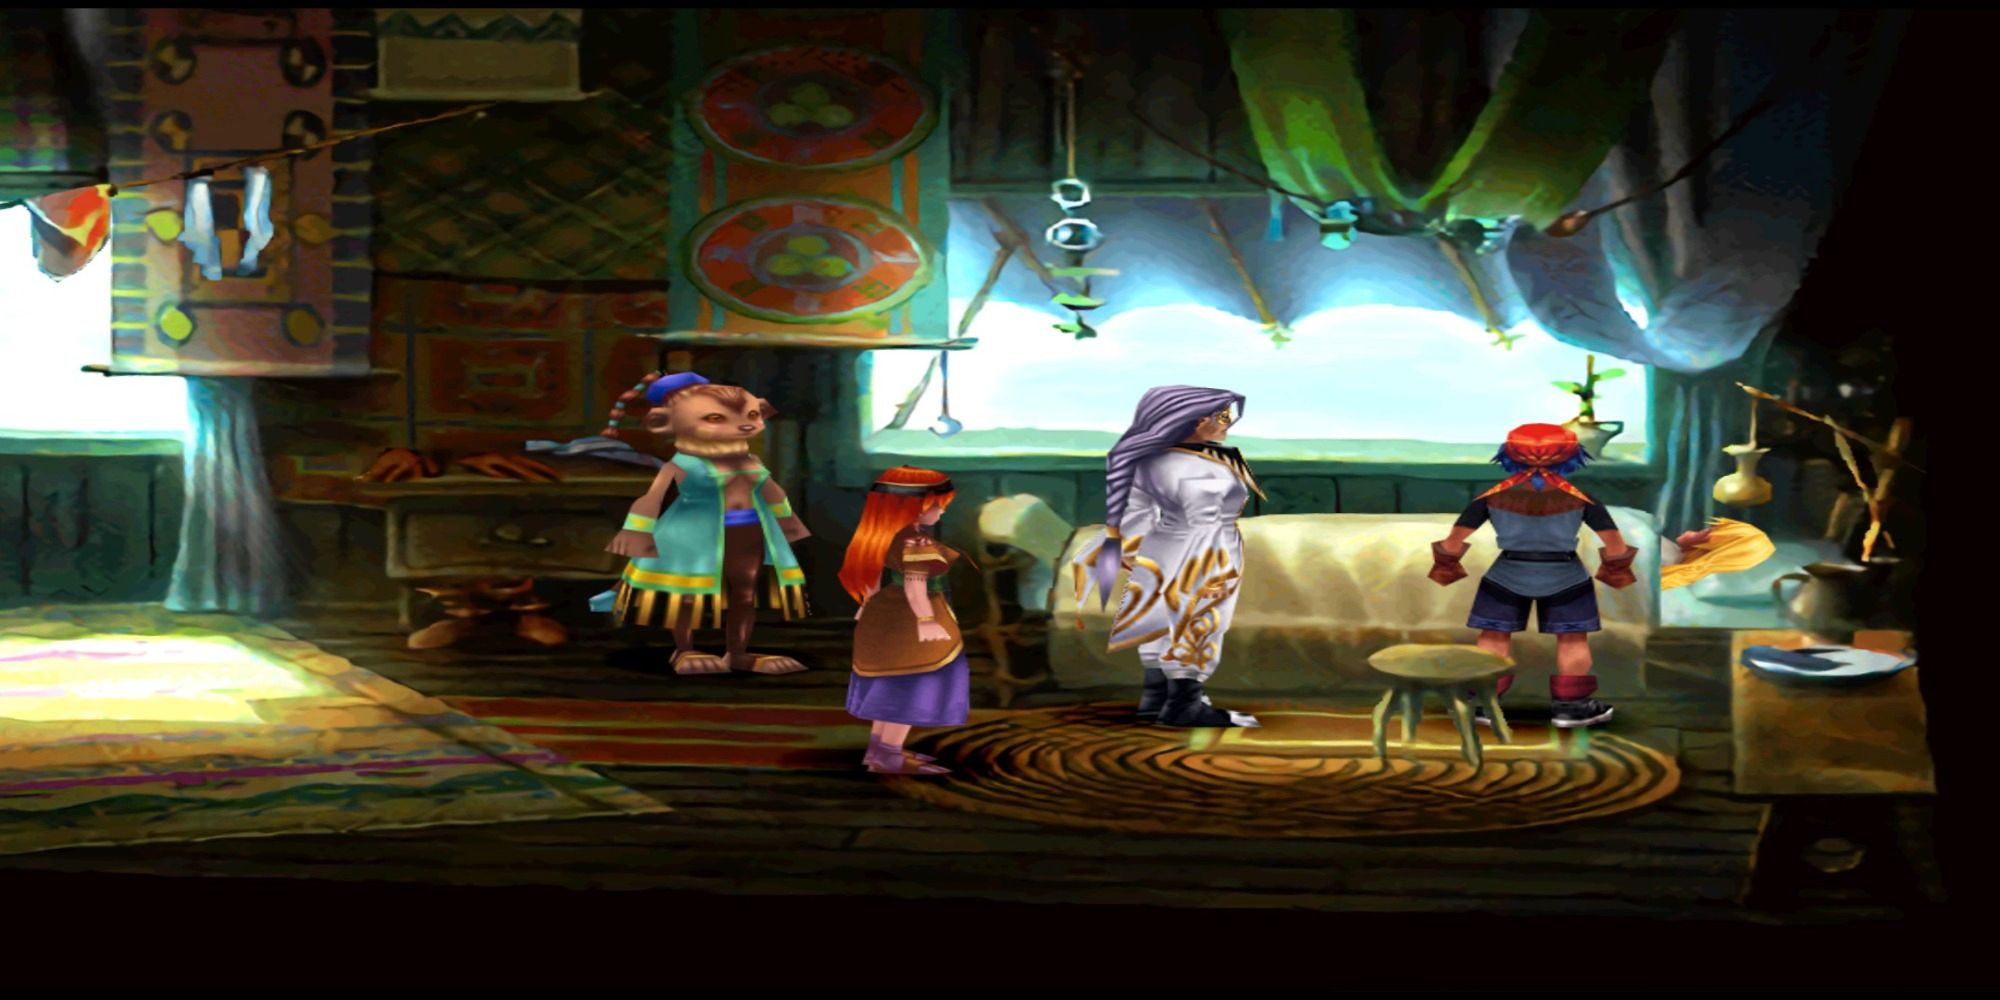 Chrono Cross Serge standing by Kid's bed